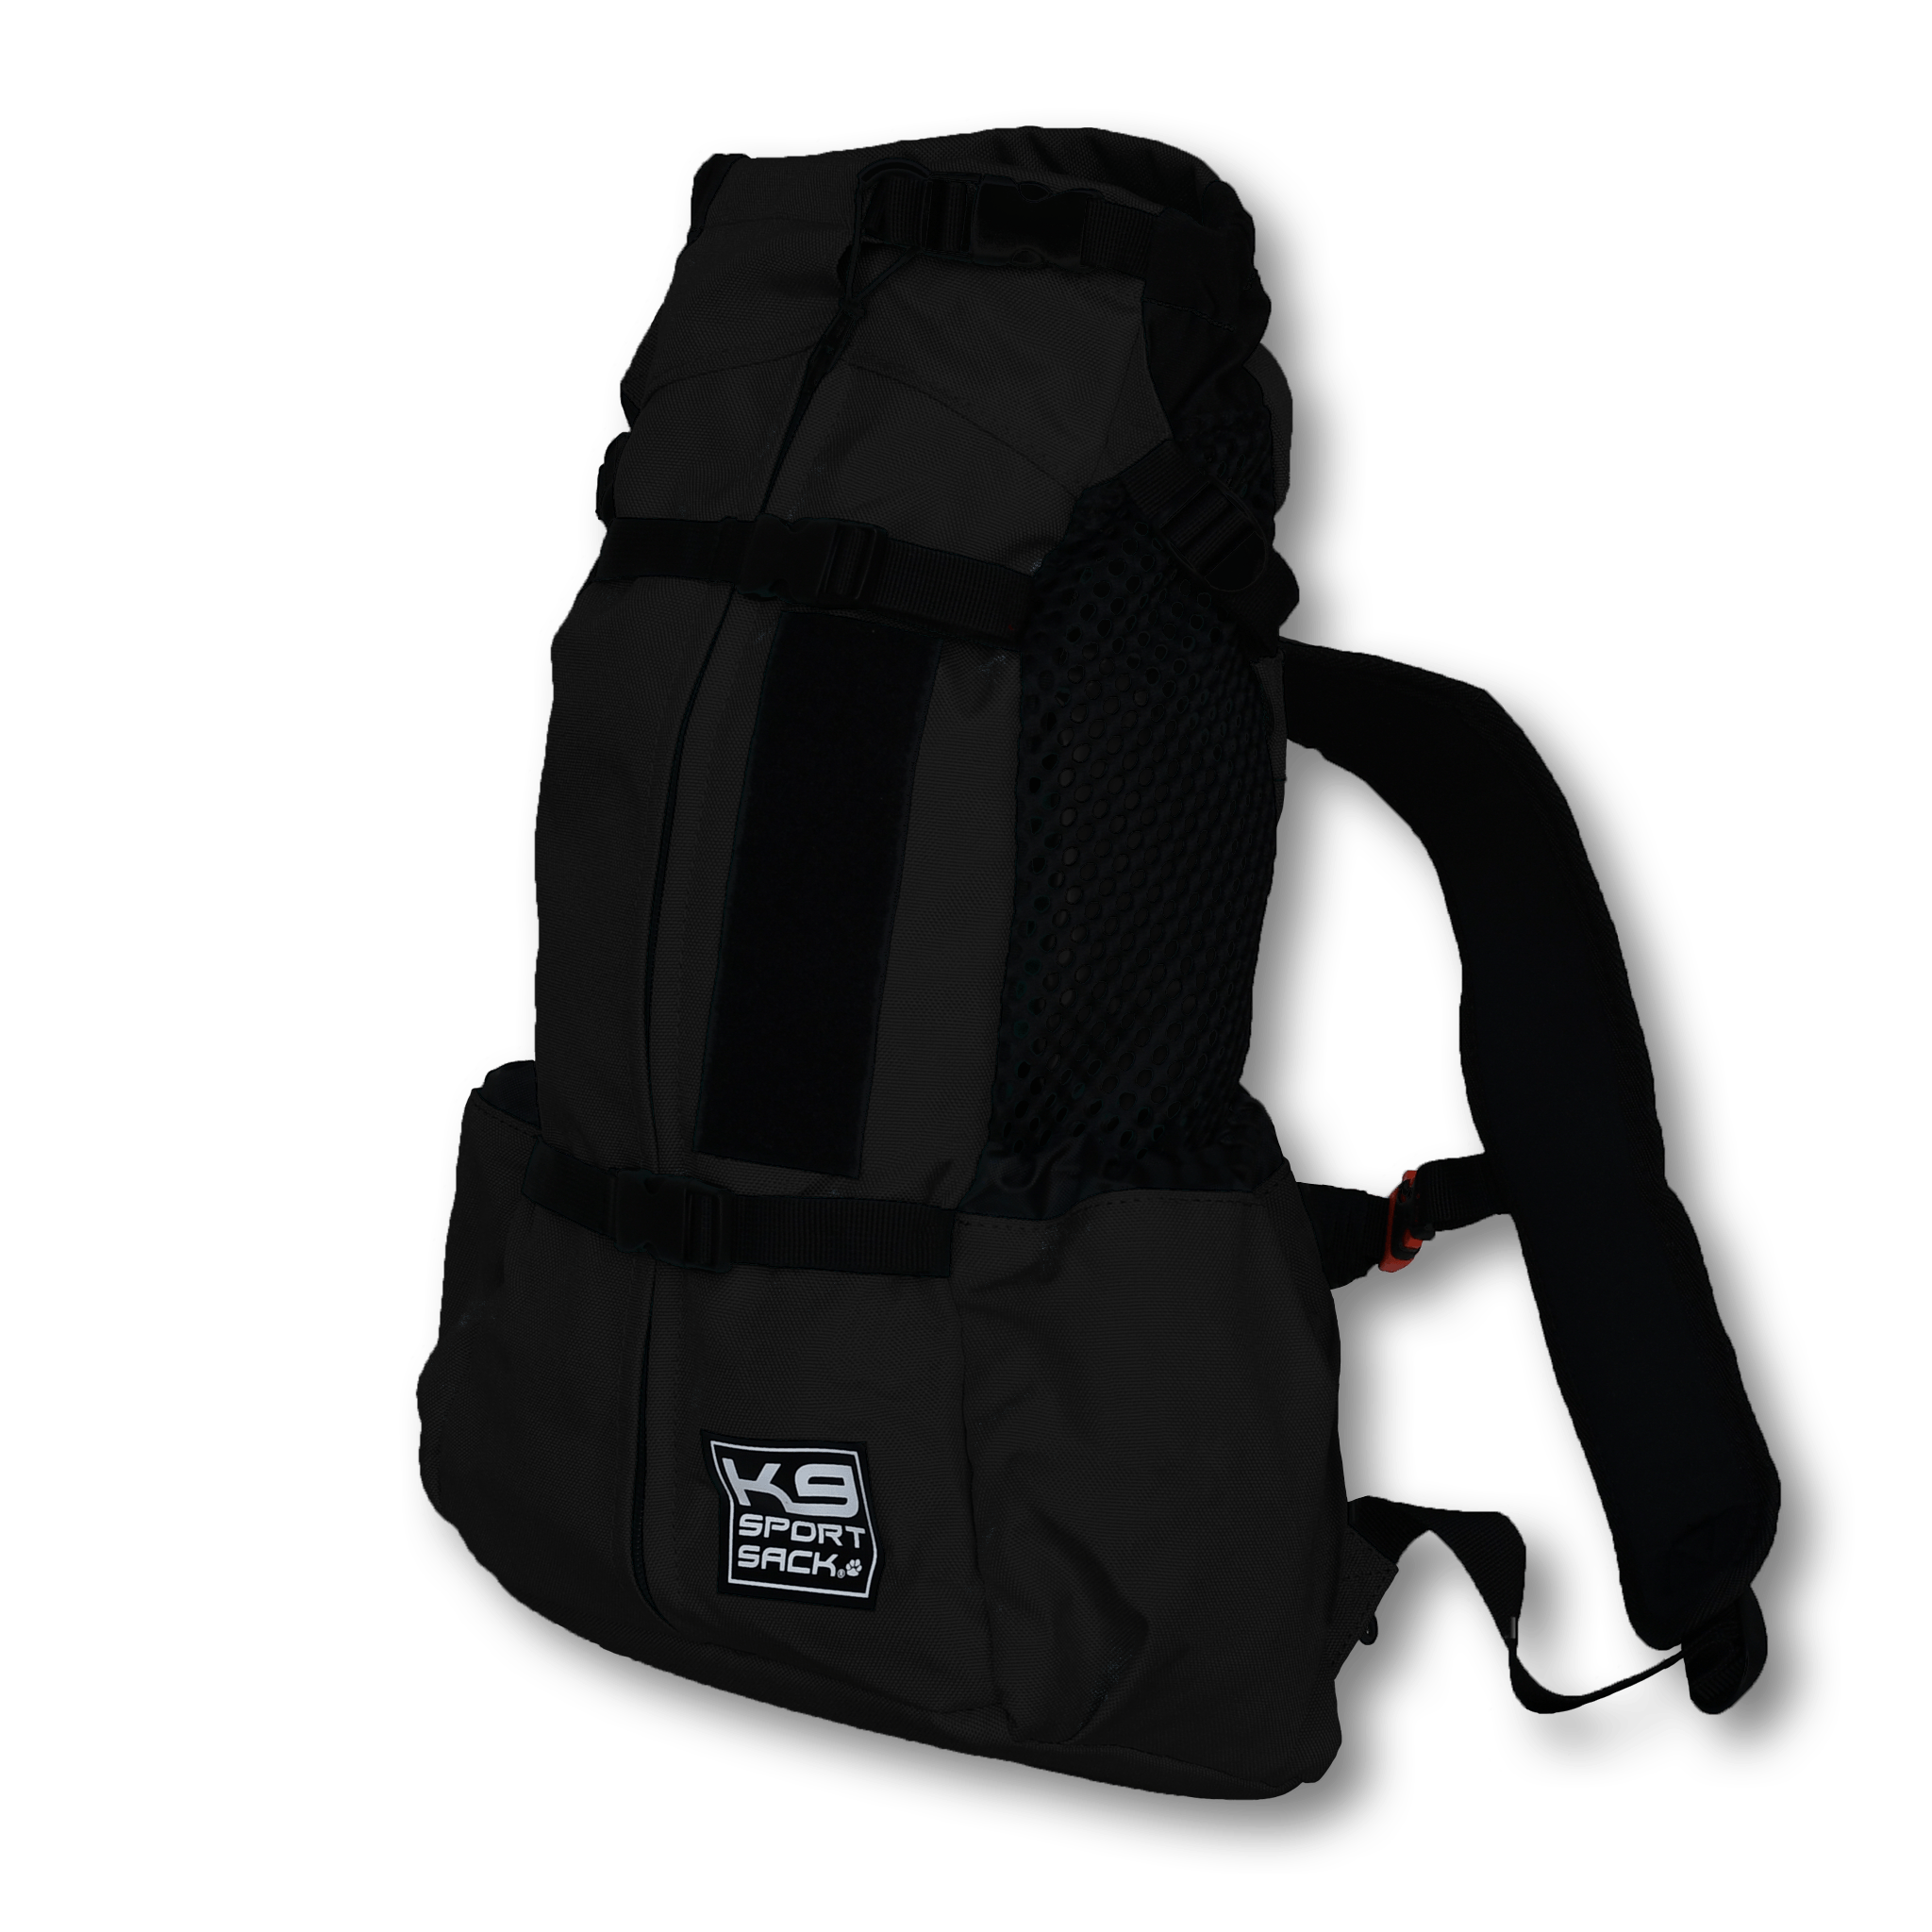 The Air 2 dog carrier black